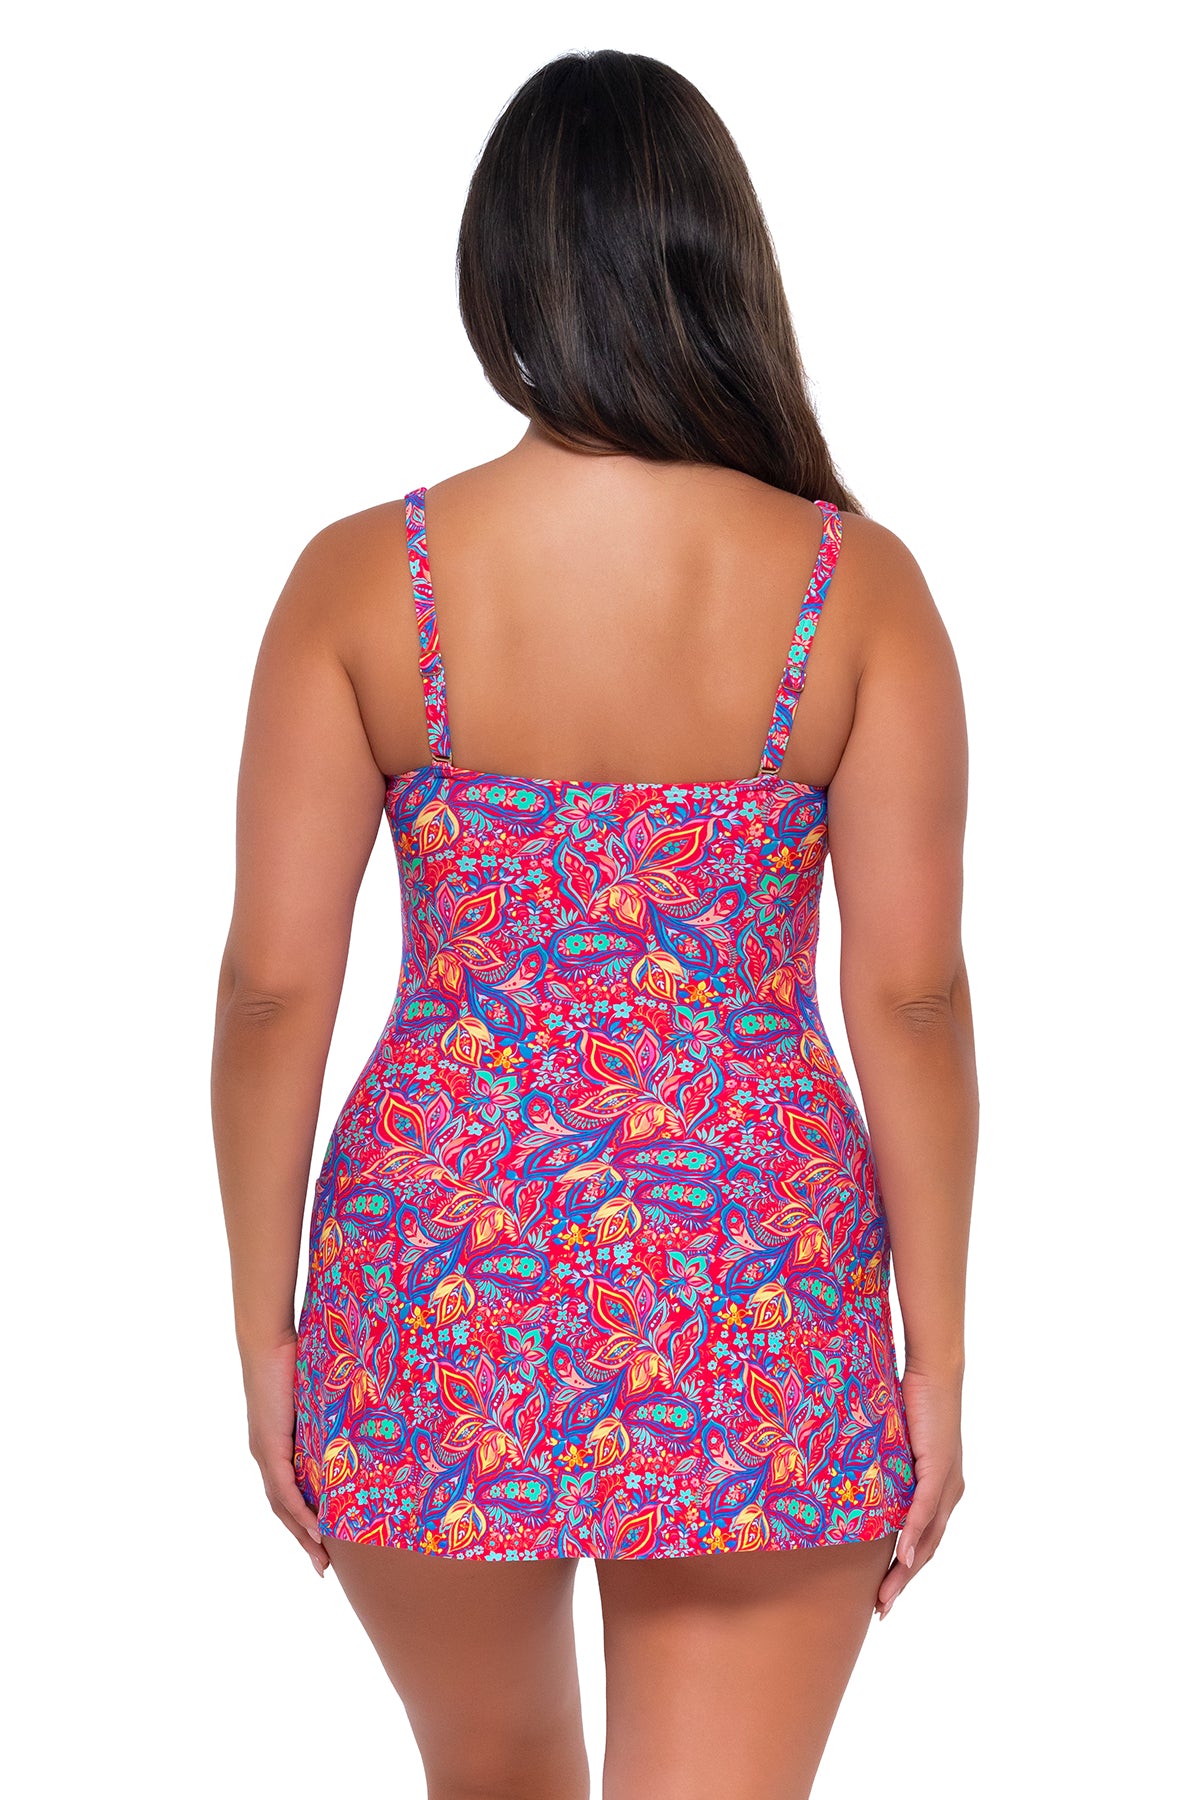 Back pose #1 of Nicky wearing Sunsets Escape Rue Paisley Sienna Swim Dress